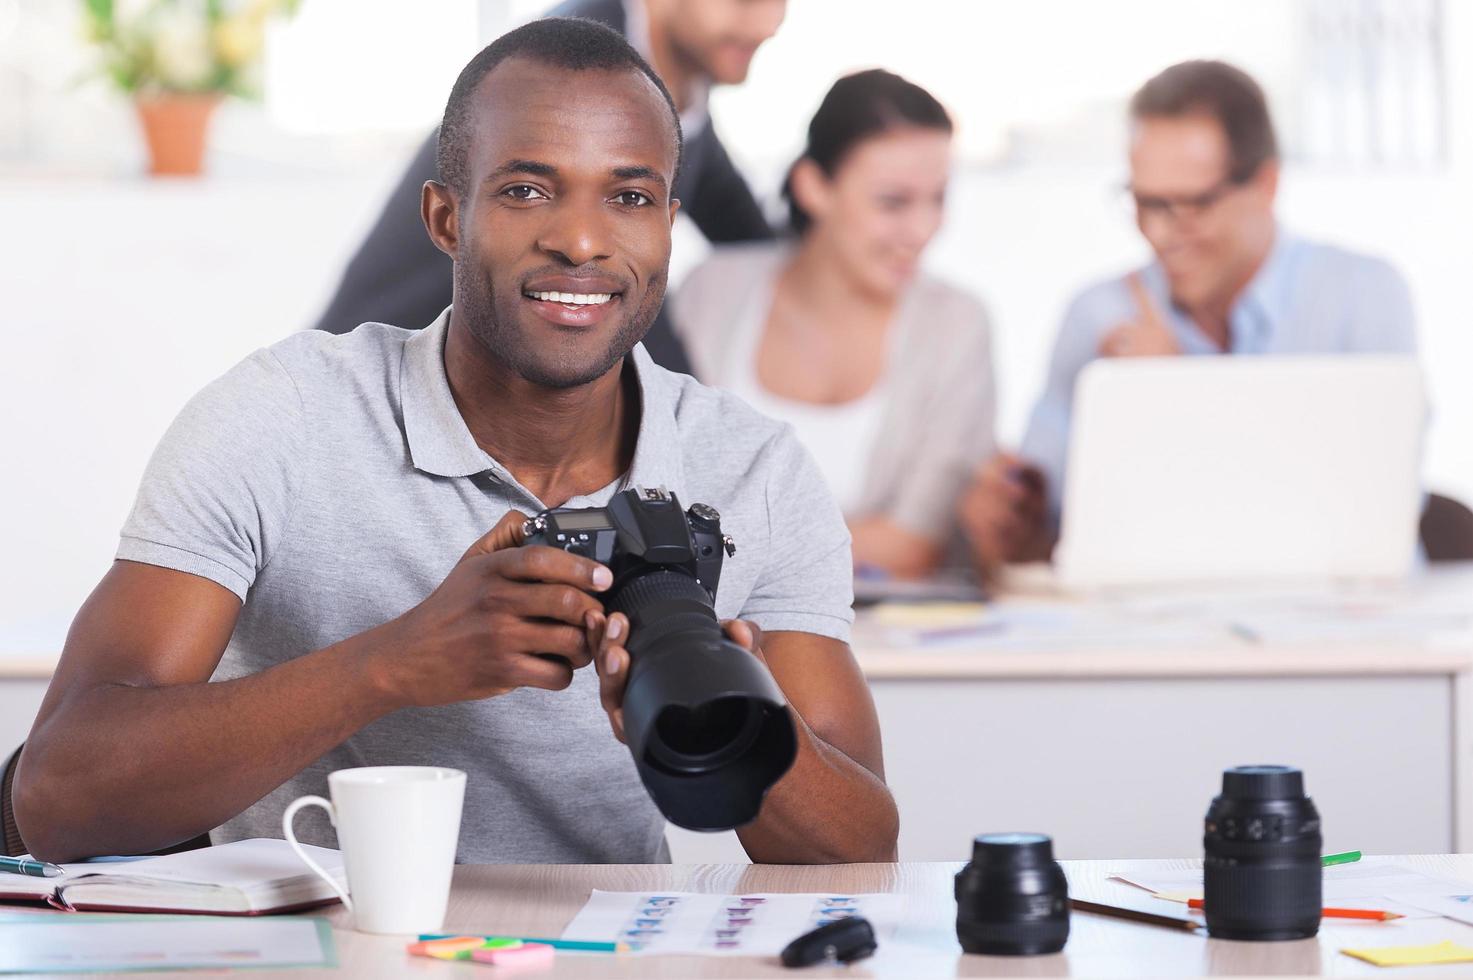 Creative people at work. Handsome young African man holding camera and smiling while three people working on background photo